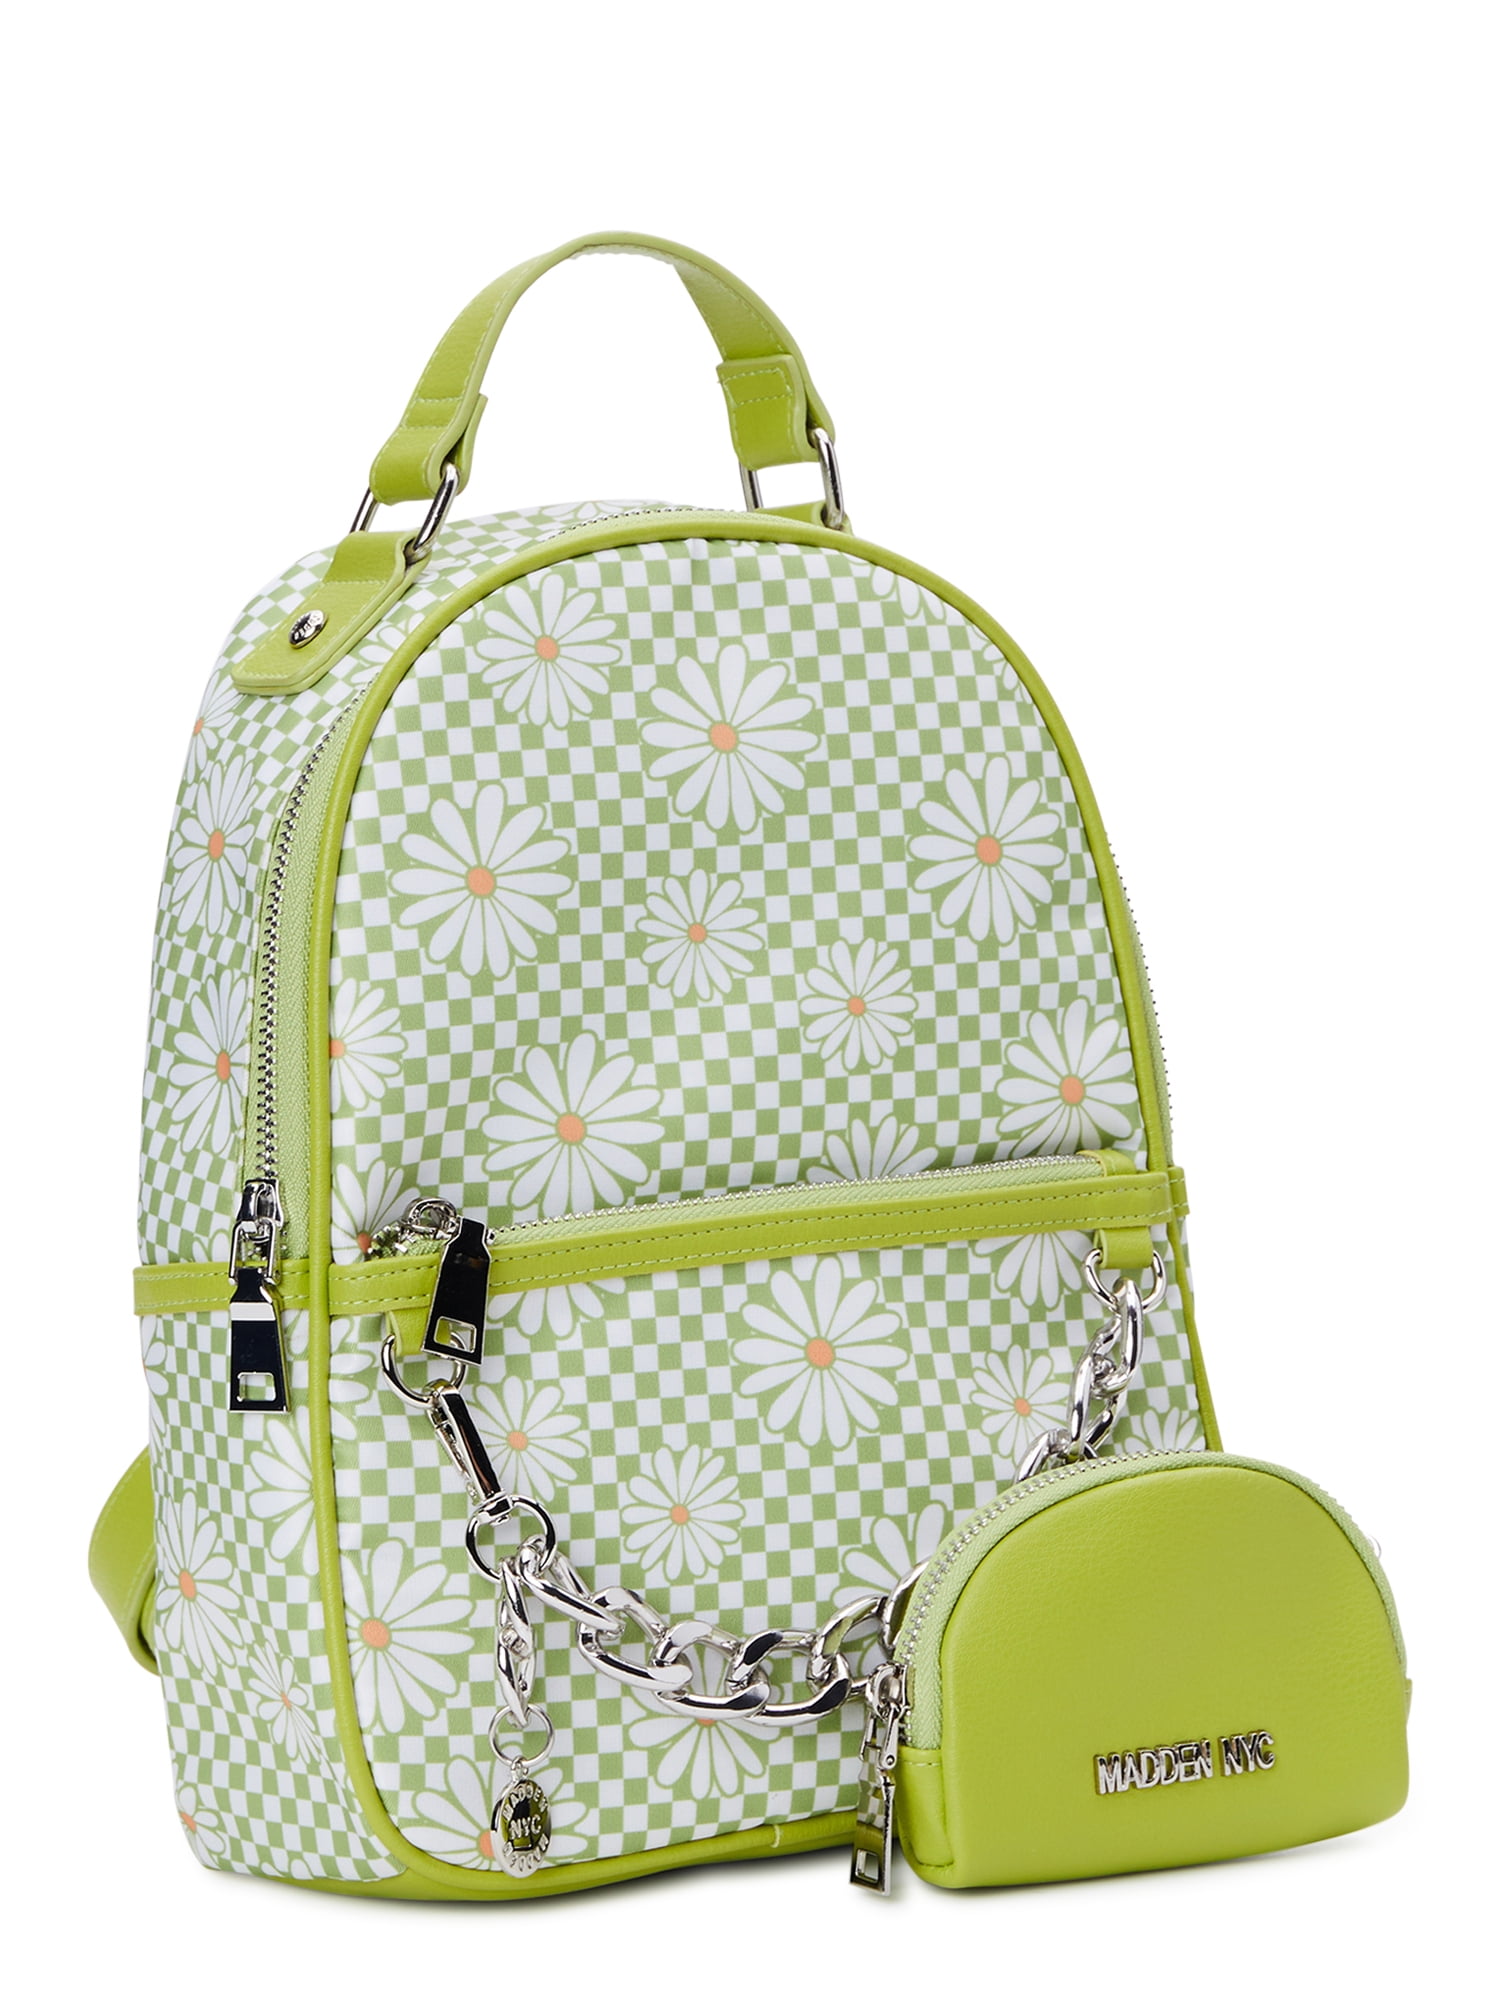 Madden NYC Women's Chain Accent Backpack with Removable Pouch Floral Checker